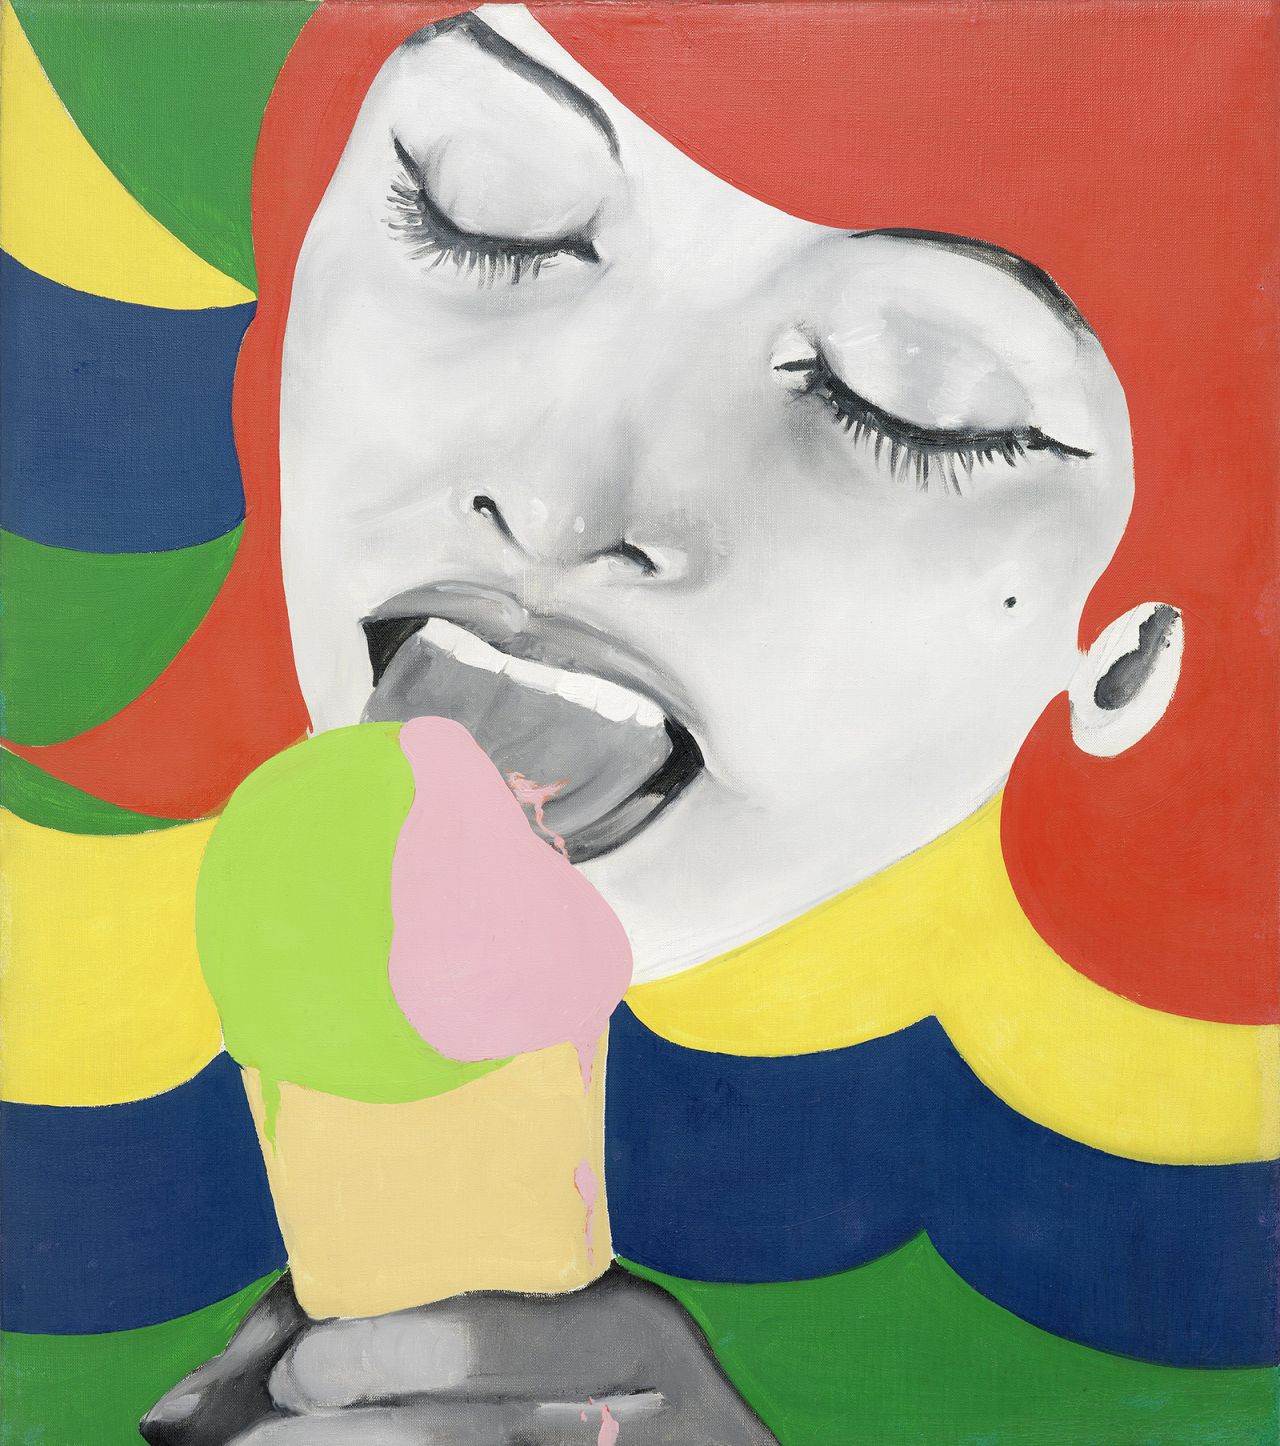 Evelyne Axell's irreverent paintings include her 1964 work "Ice Cream."